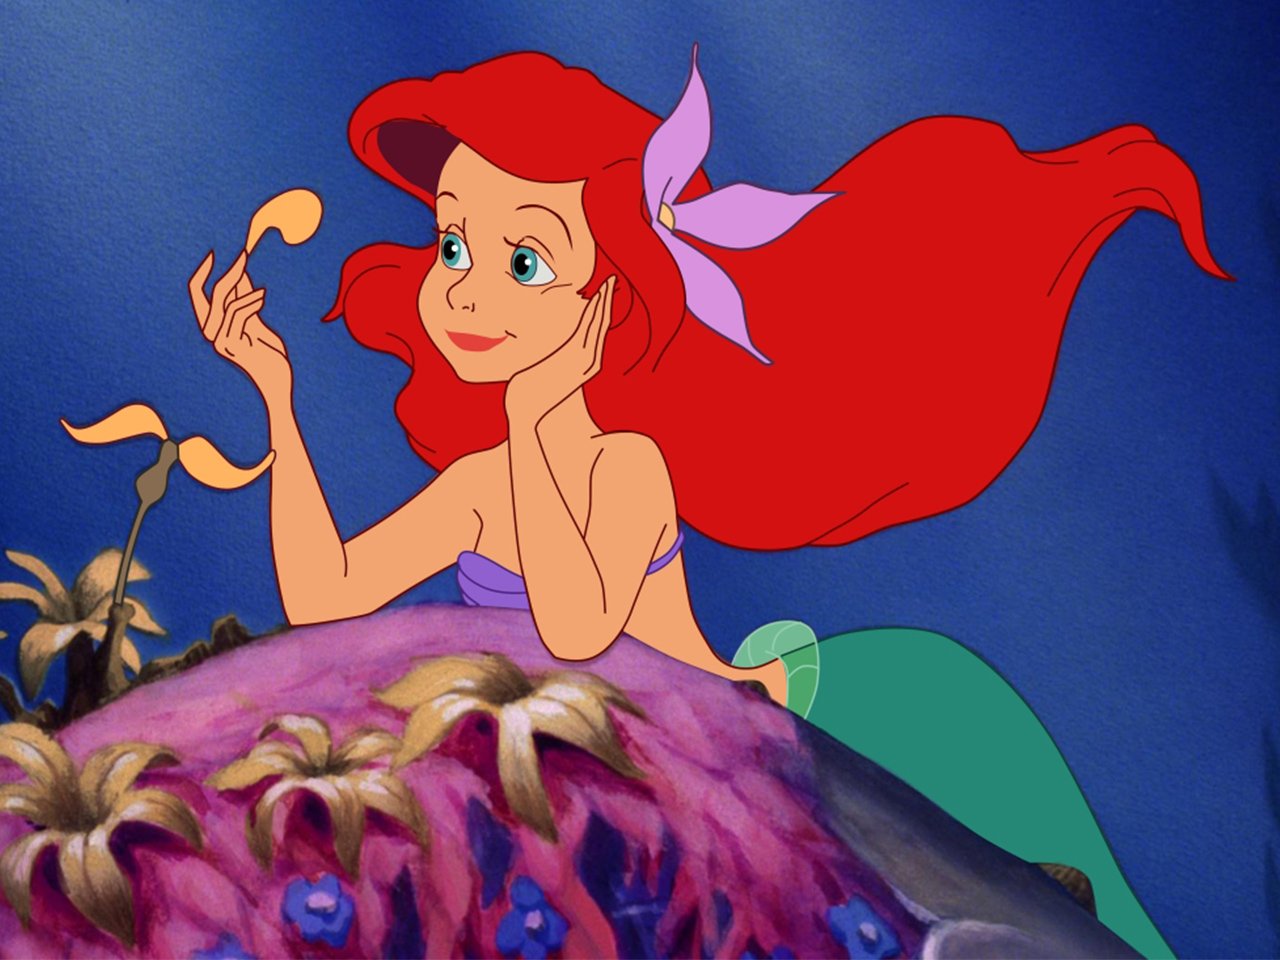 A still from the kids' animated movie The Little Mermaid